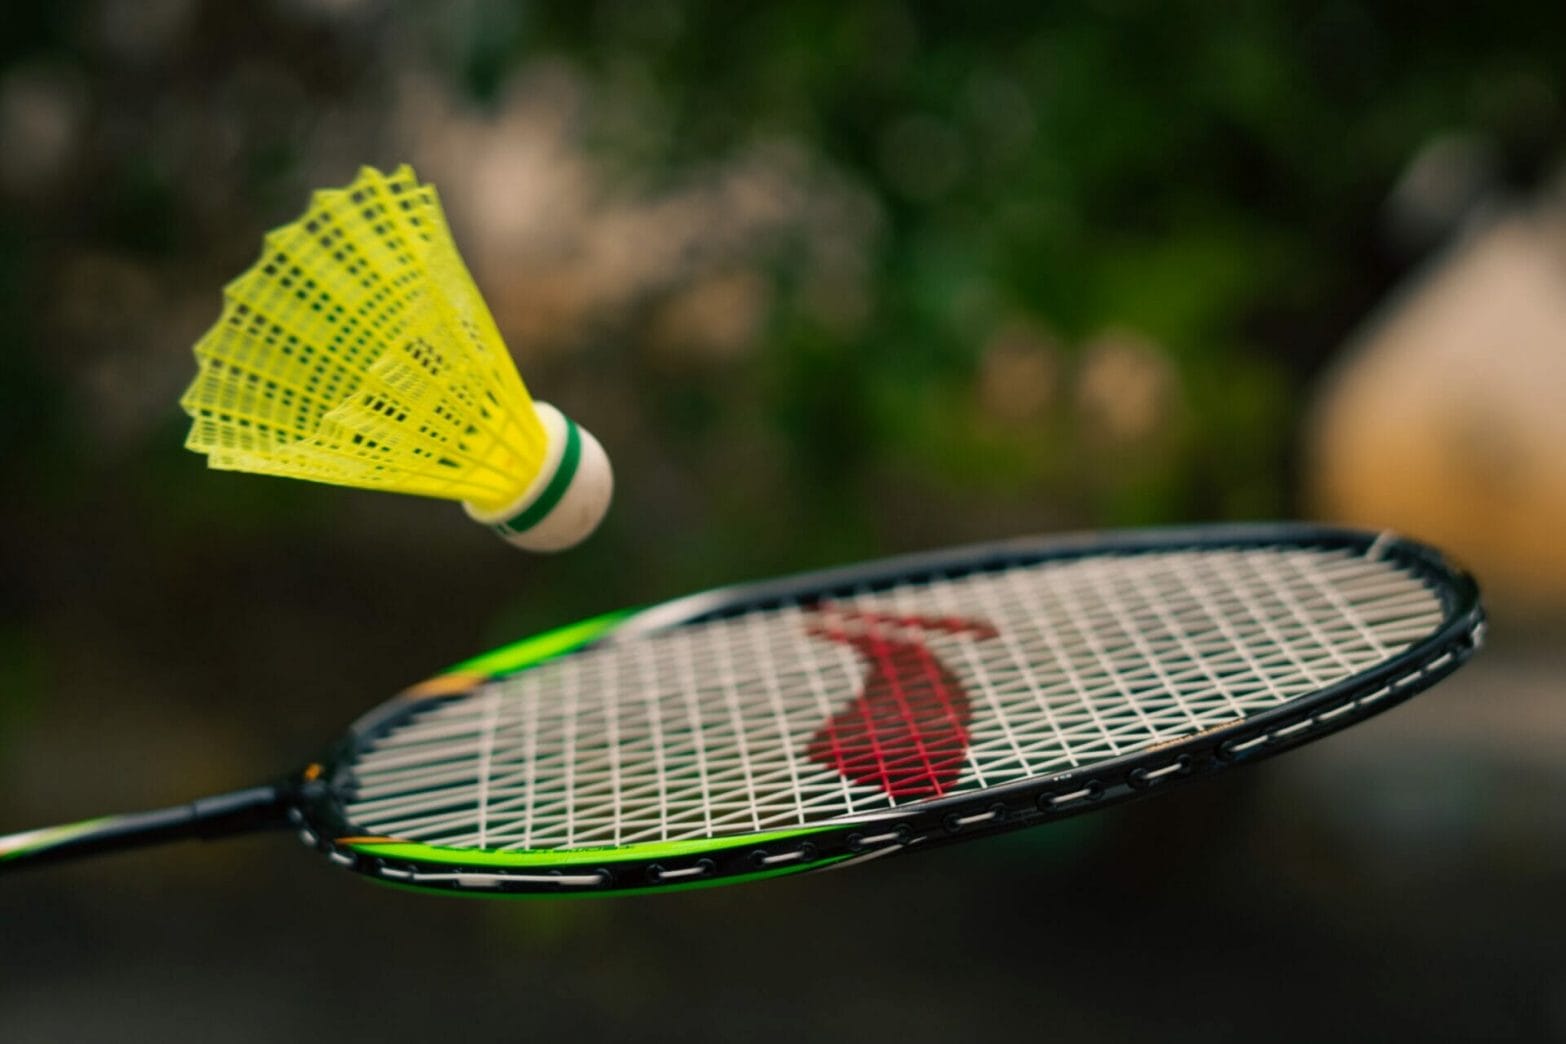 What is the thing you hit in badminton?